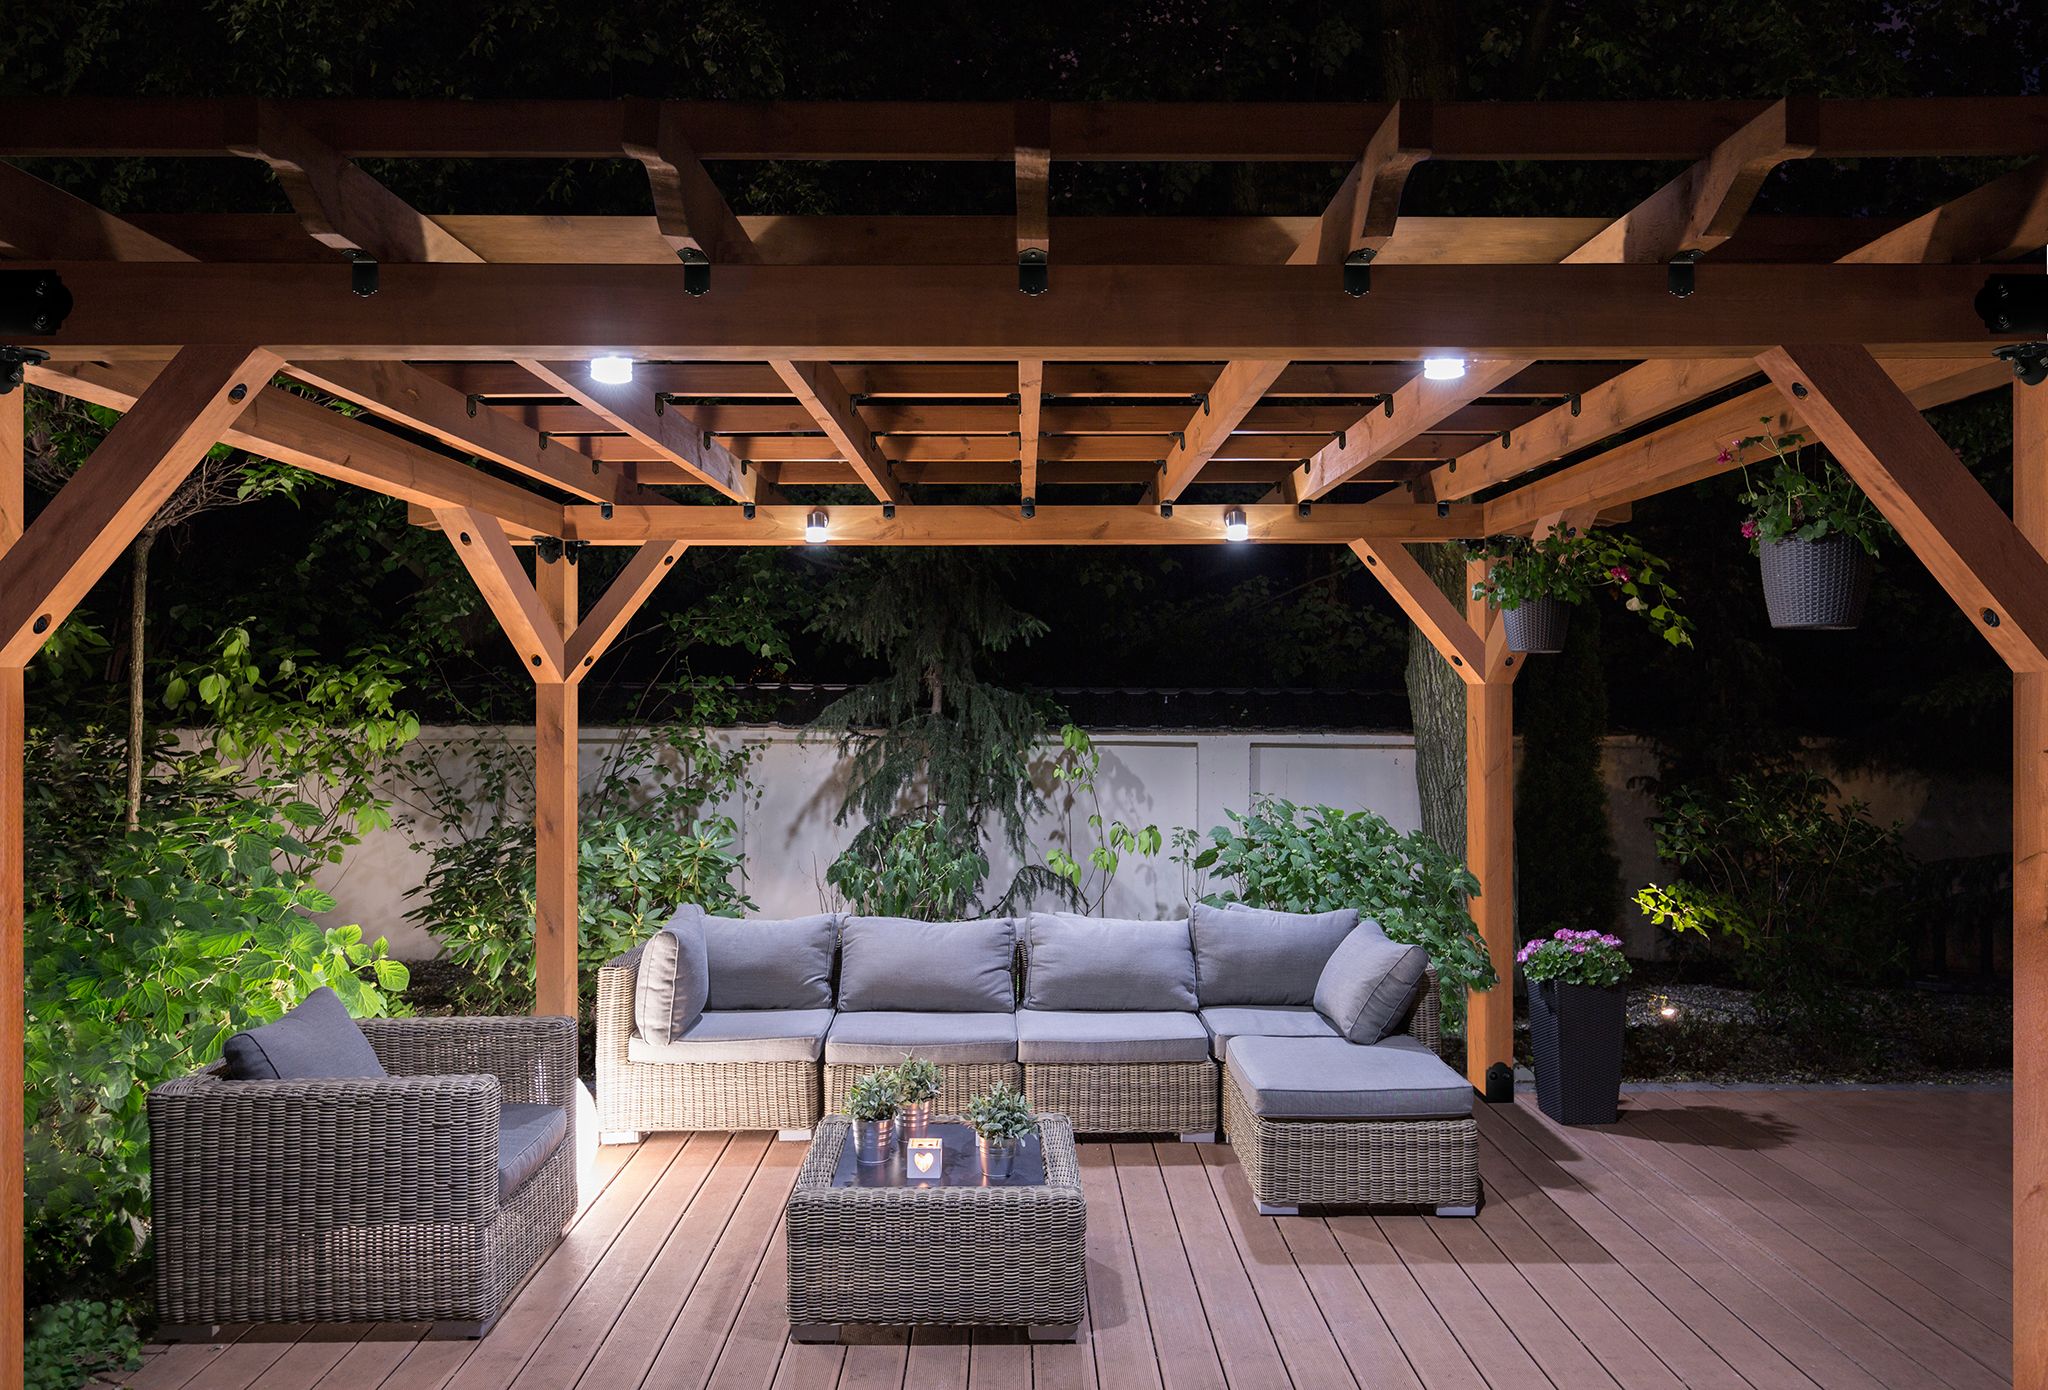 Pergola covering a wooden deck with couches and large pants. Photo taken at night.